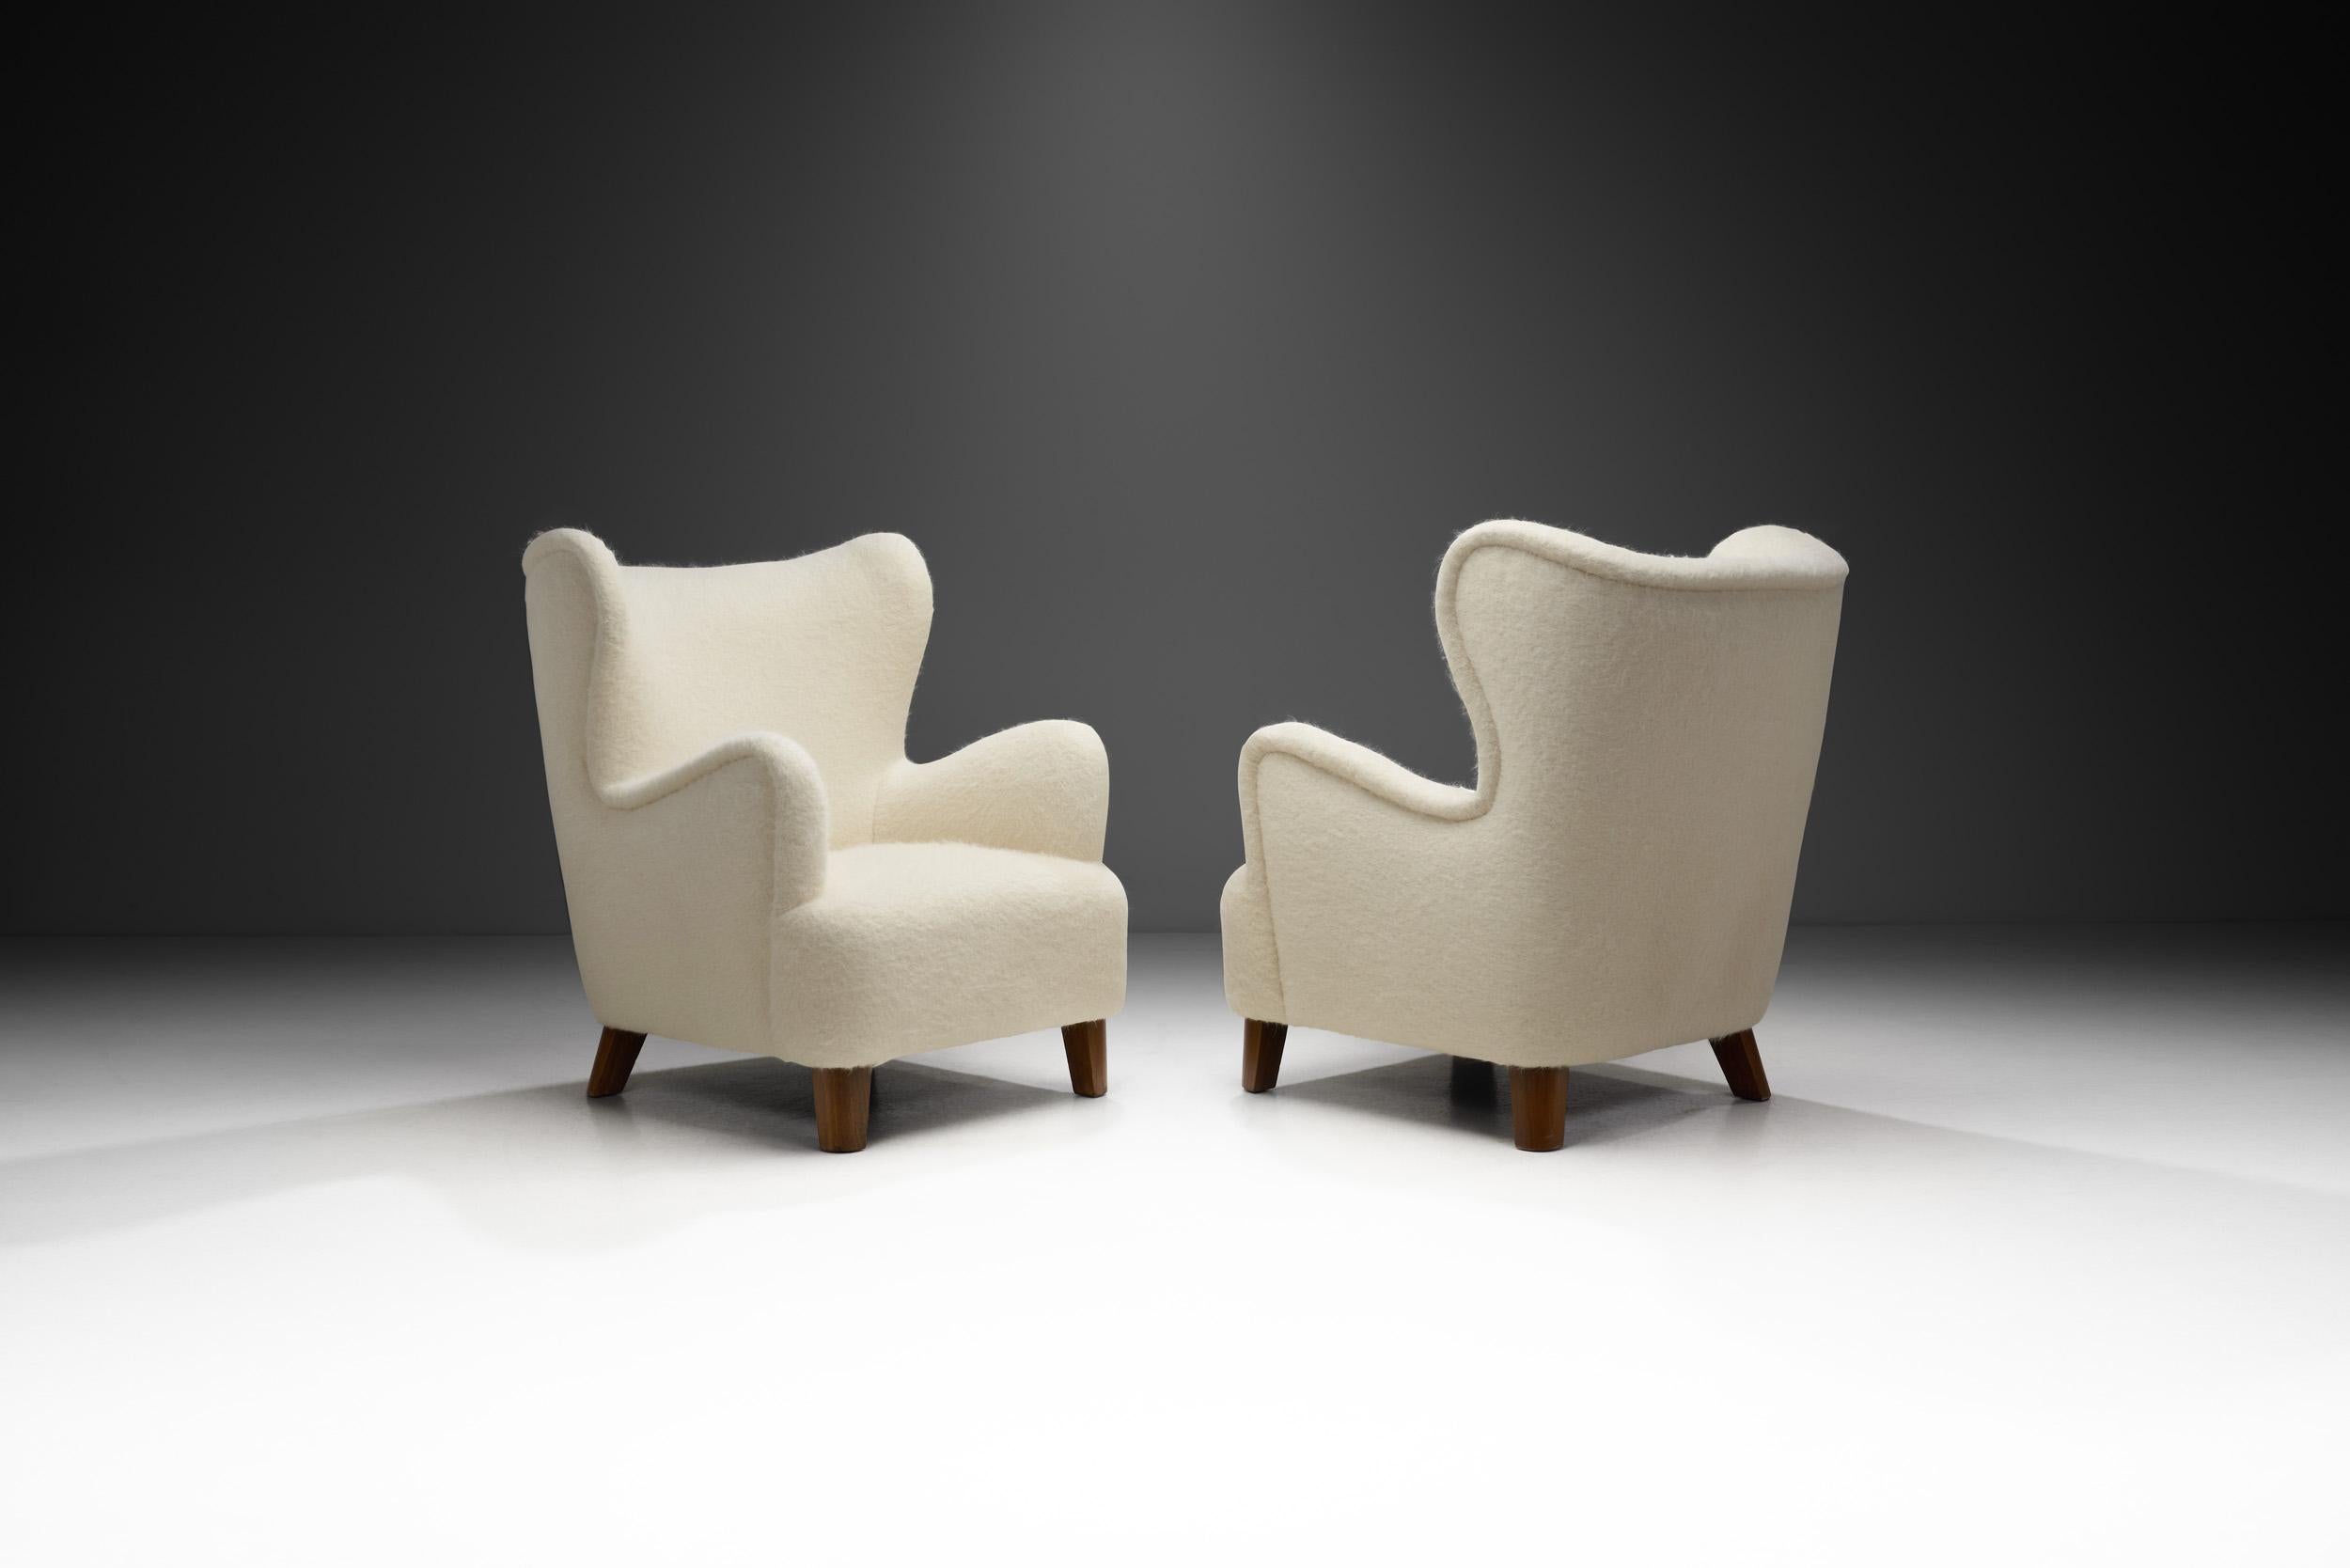 This elegant pair of winged back chairs is a great representation of the quality and craftsmanship of European master cabinetmakers of the 20th century and the immediately recognizable characteristics of the era’s design. With the organically curved